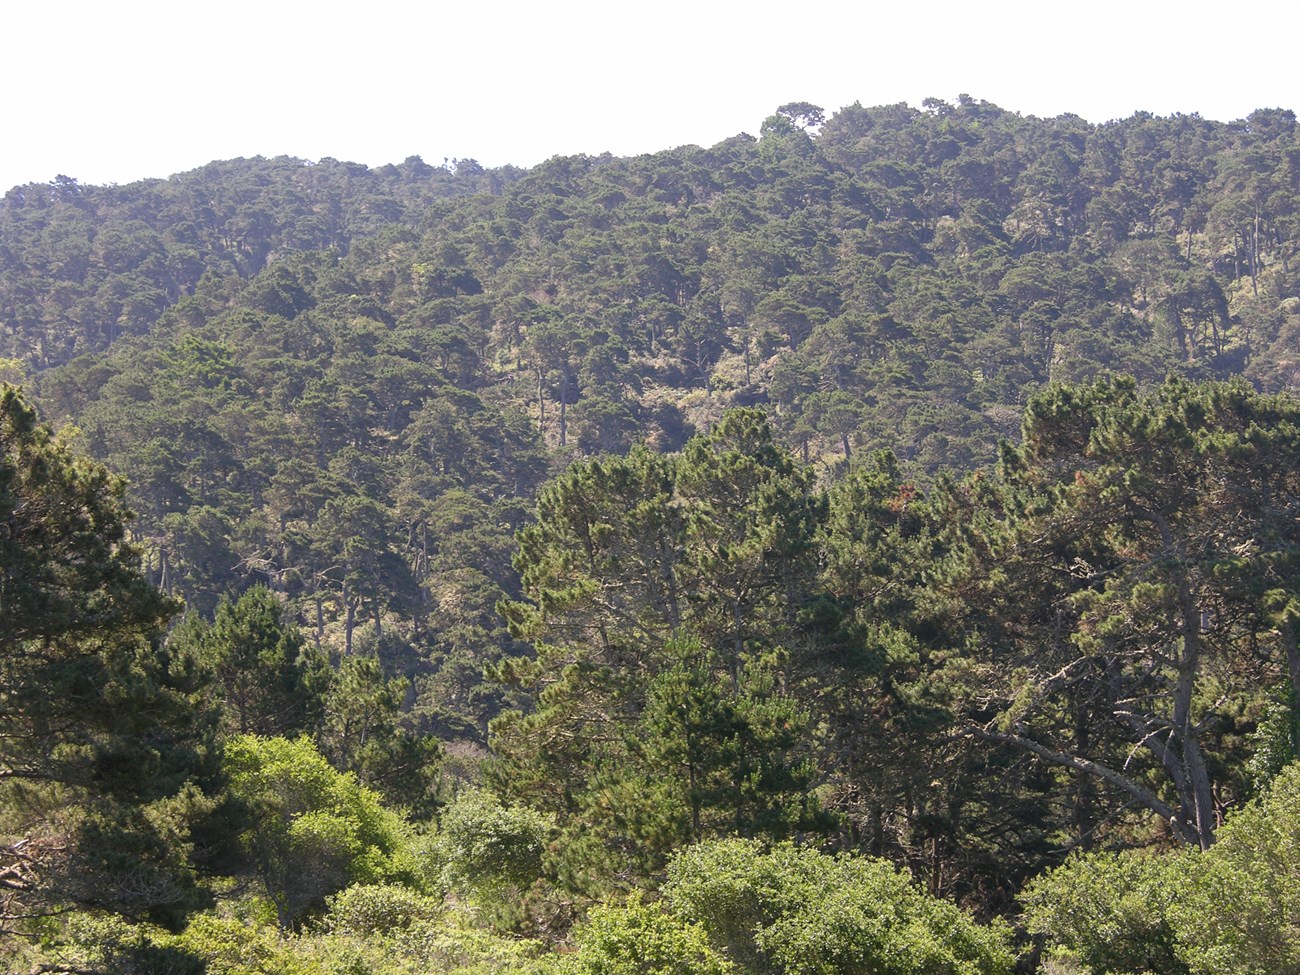 Pine trees cover the side of a ridge.